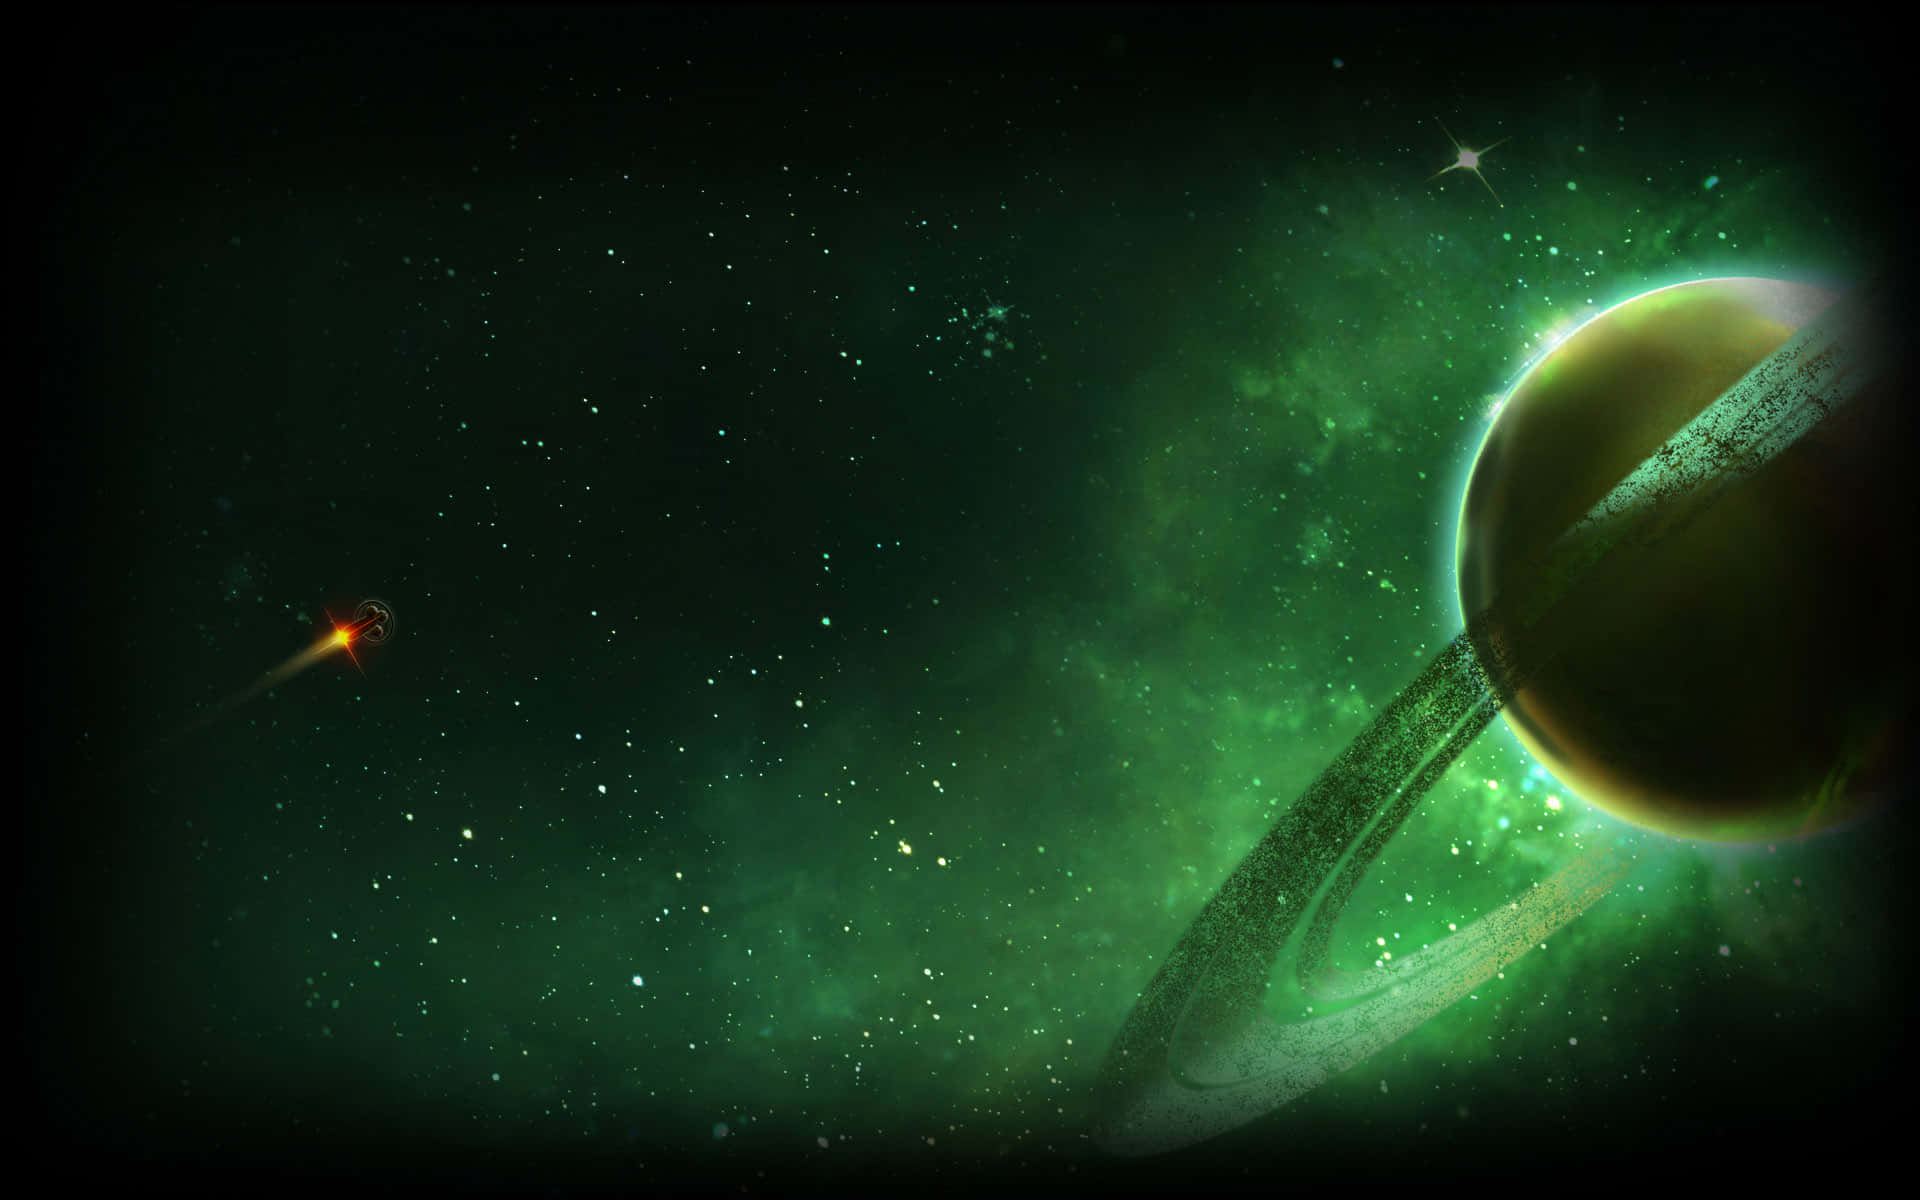 Explore the beauty of the Green Galaxy Wallpaper